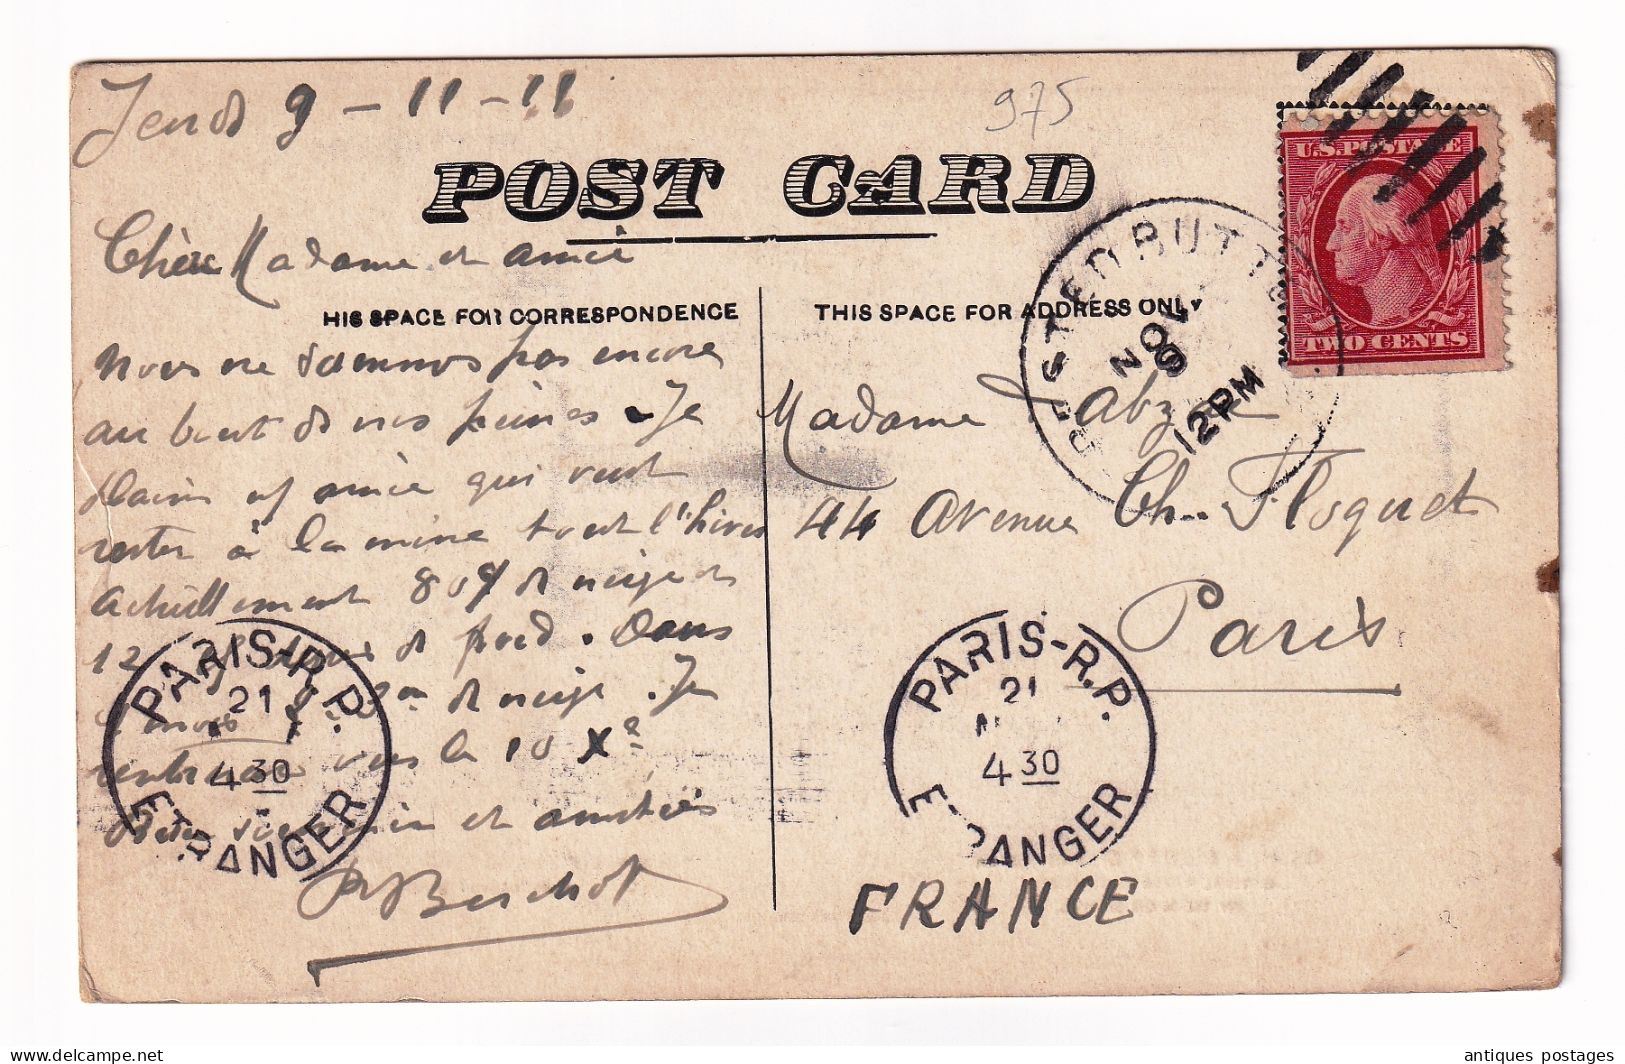 Post Card 1911 Crested Butte Colorado Elk Mountain House Hubbard USA Paris France Two Cents Red Washington - Storia Postale